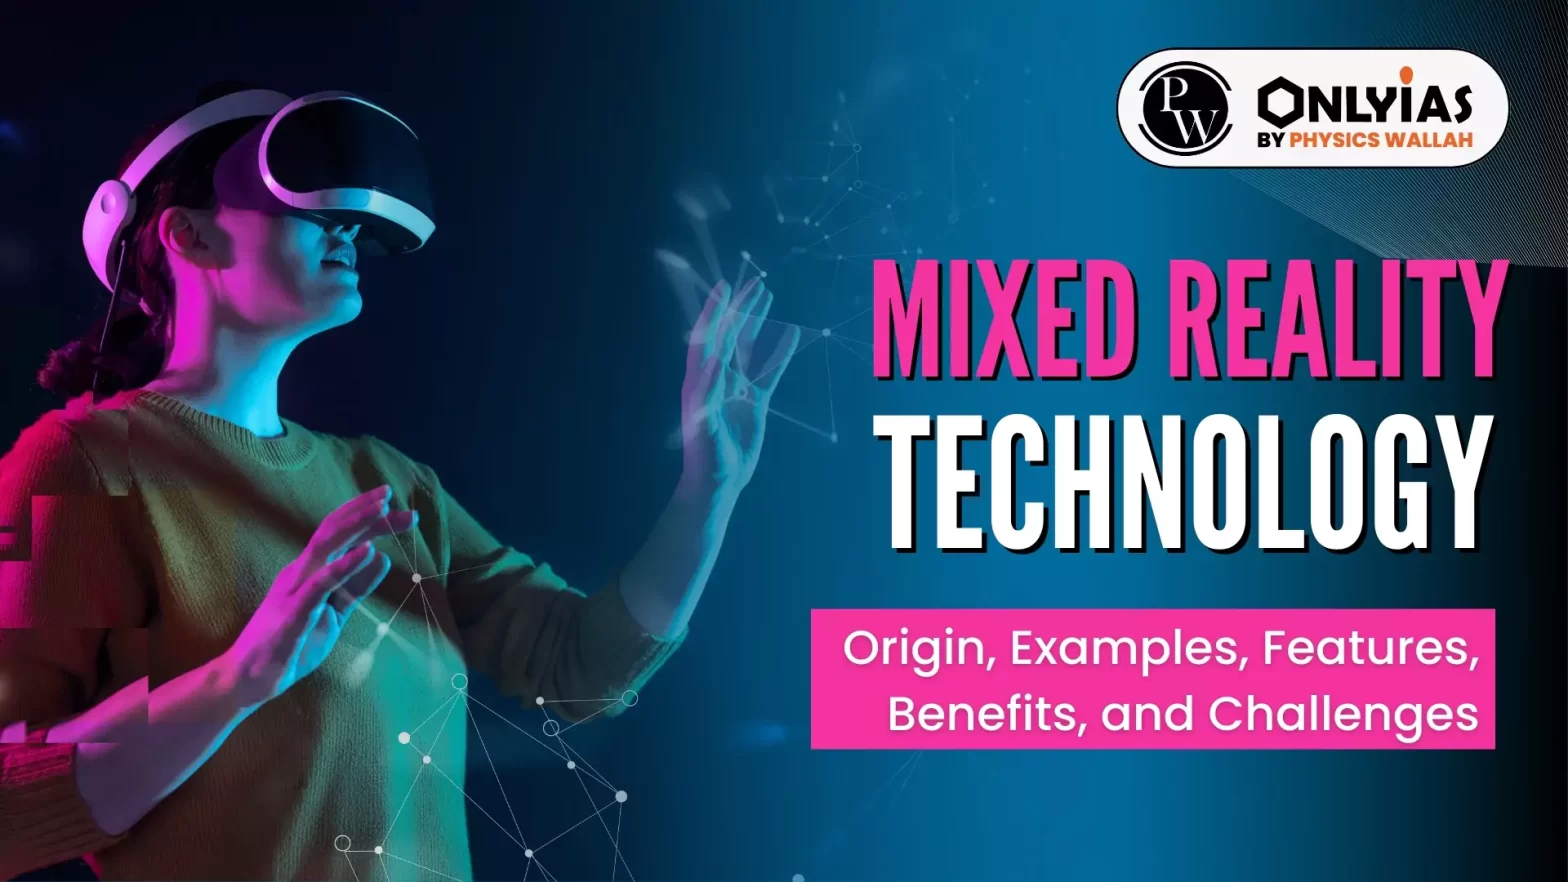 Mixed Reality Technology: Origin, Examples, Features, Benefits, and Challenges